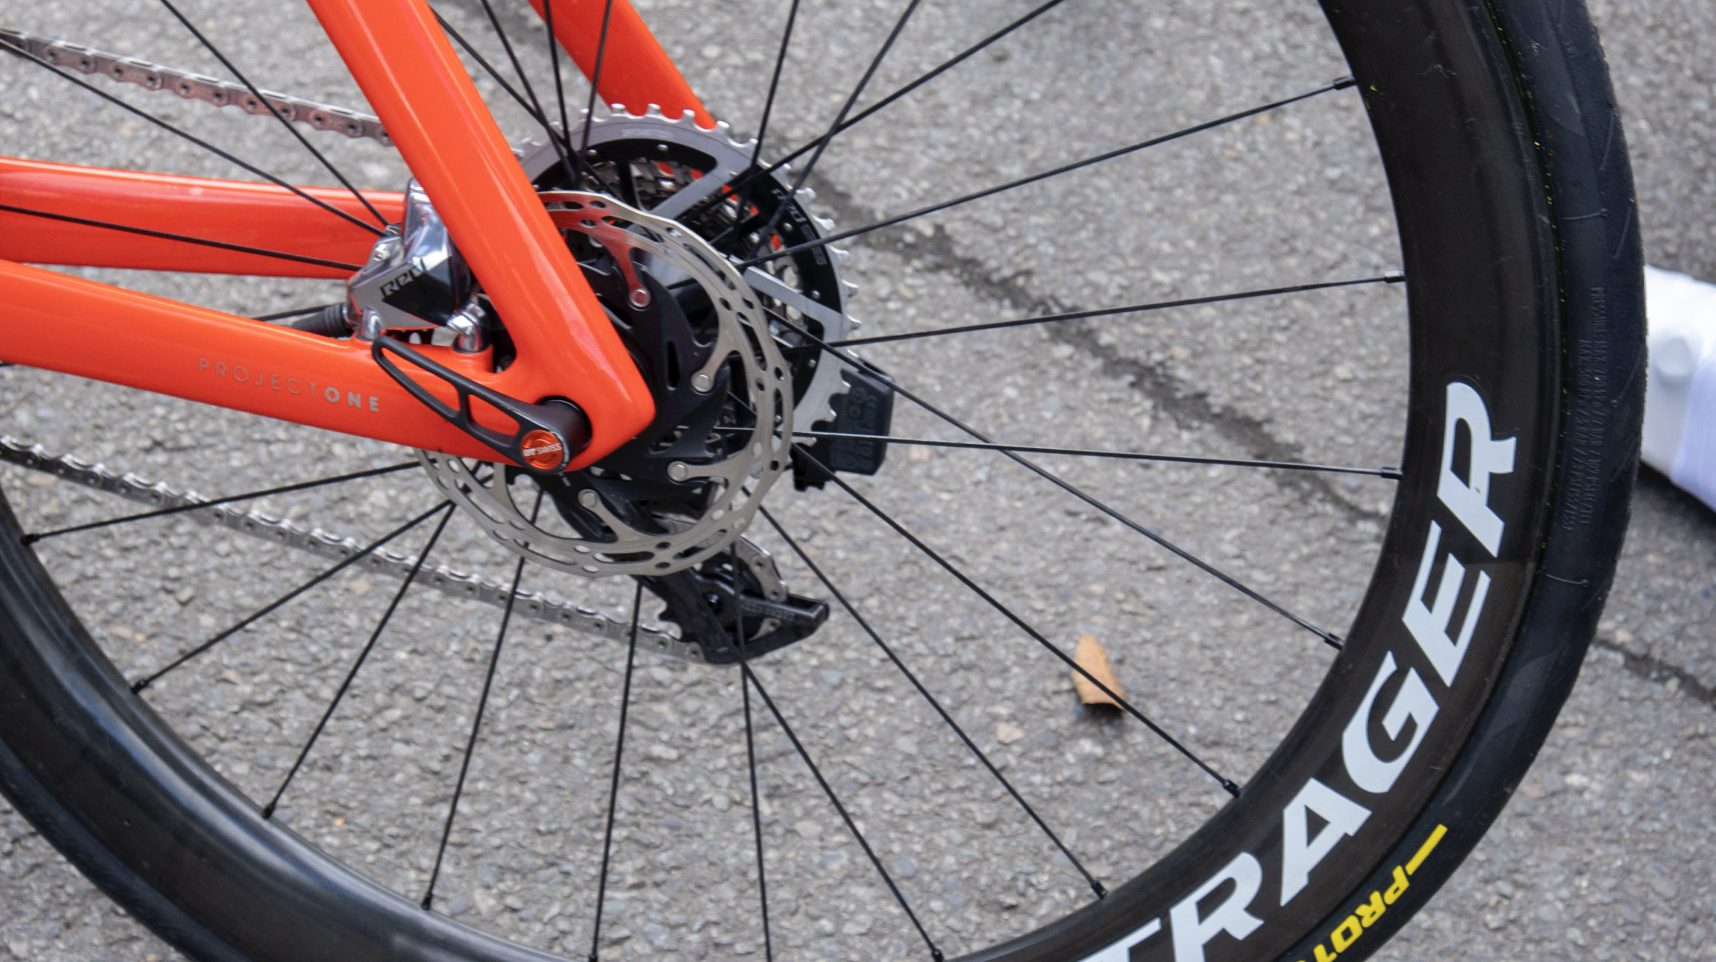 The image shows what appears to be a new SRAM Red cassette.